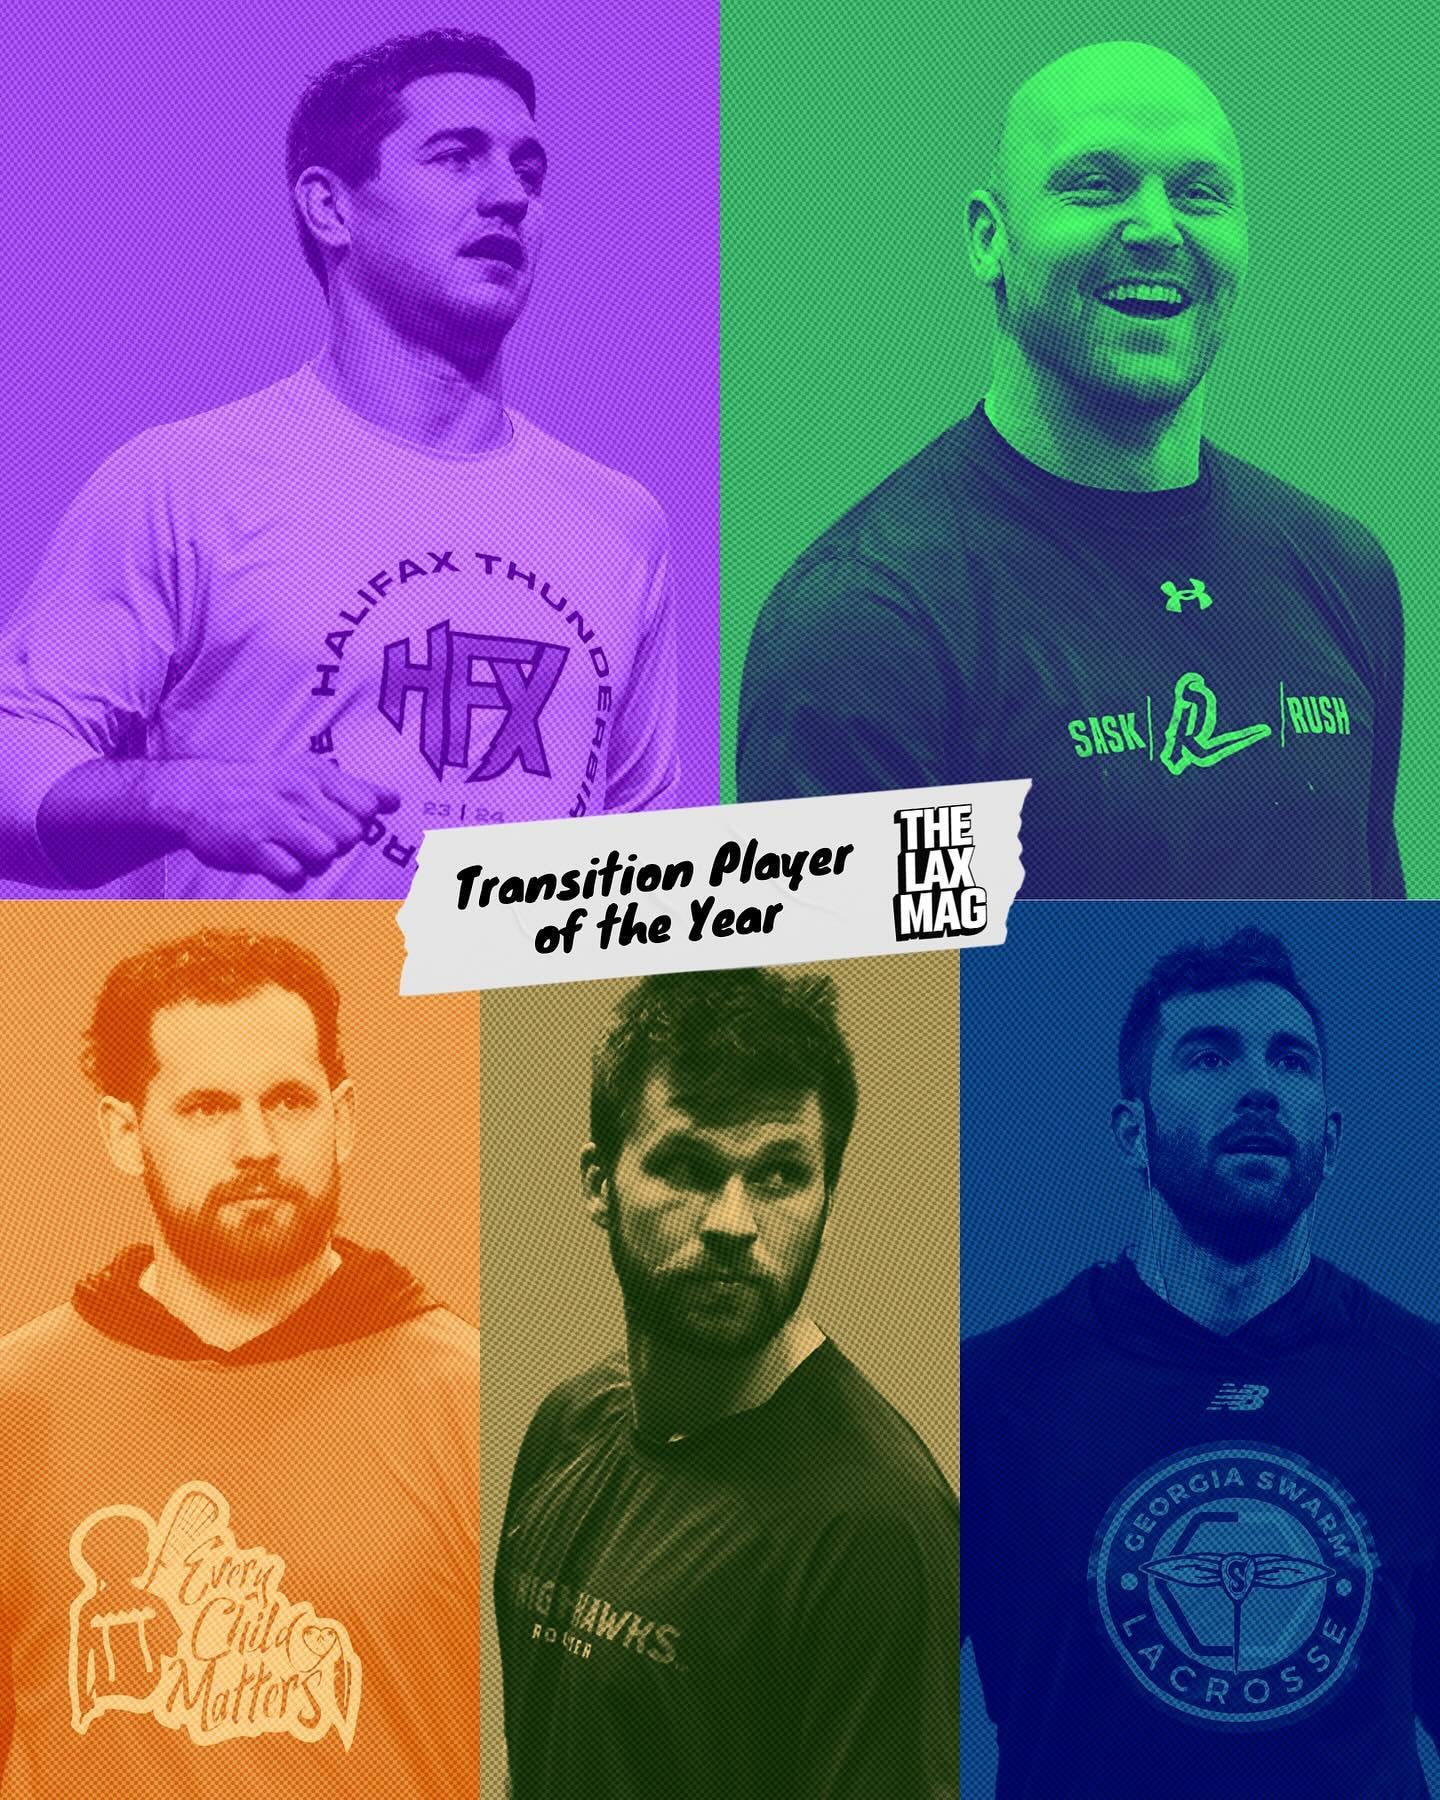 Defining a transition player has become much more complicated than when the NLL&rsquo;s TPOTY award was first established in hopes of recognizing two-way talents like Toll, Steenhuis, Merrill and more.
&nbsp;
Hit the link in out bio for The Lax Mag&r